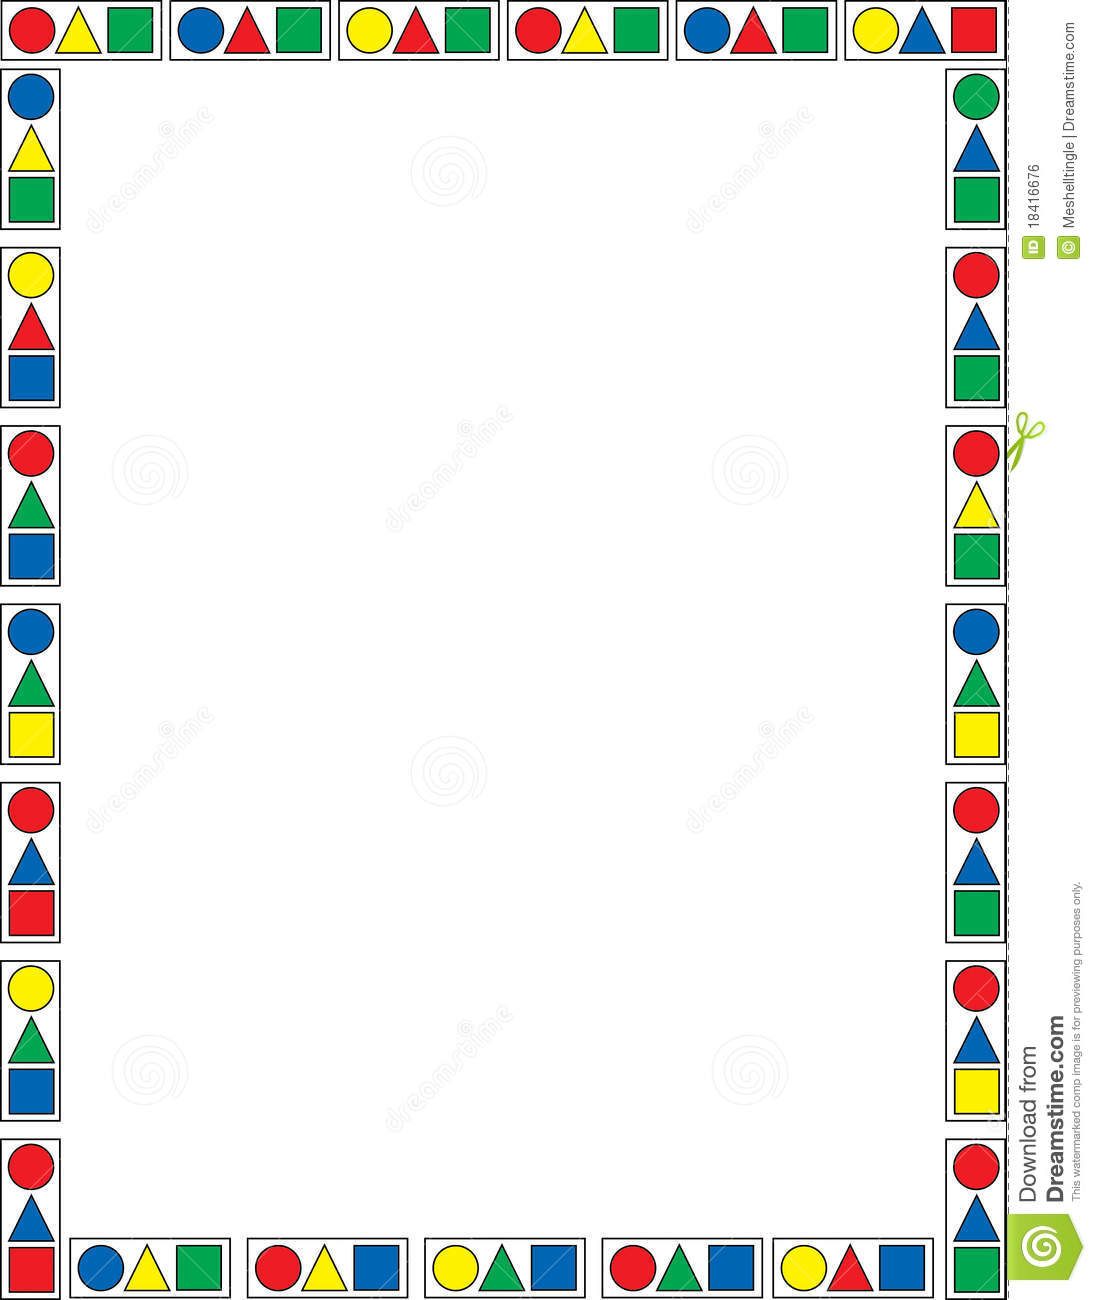 Colorful Geometric Shapes Forming Decorative Border With Copy Space